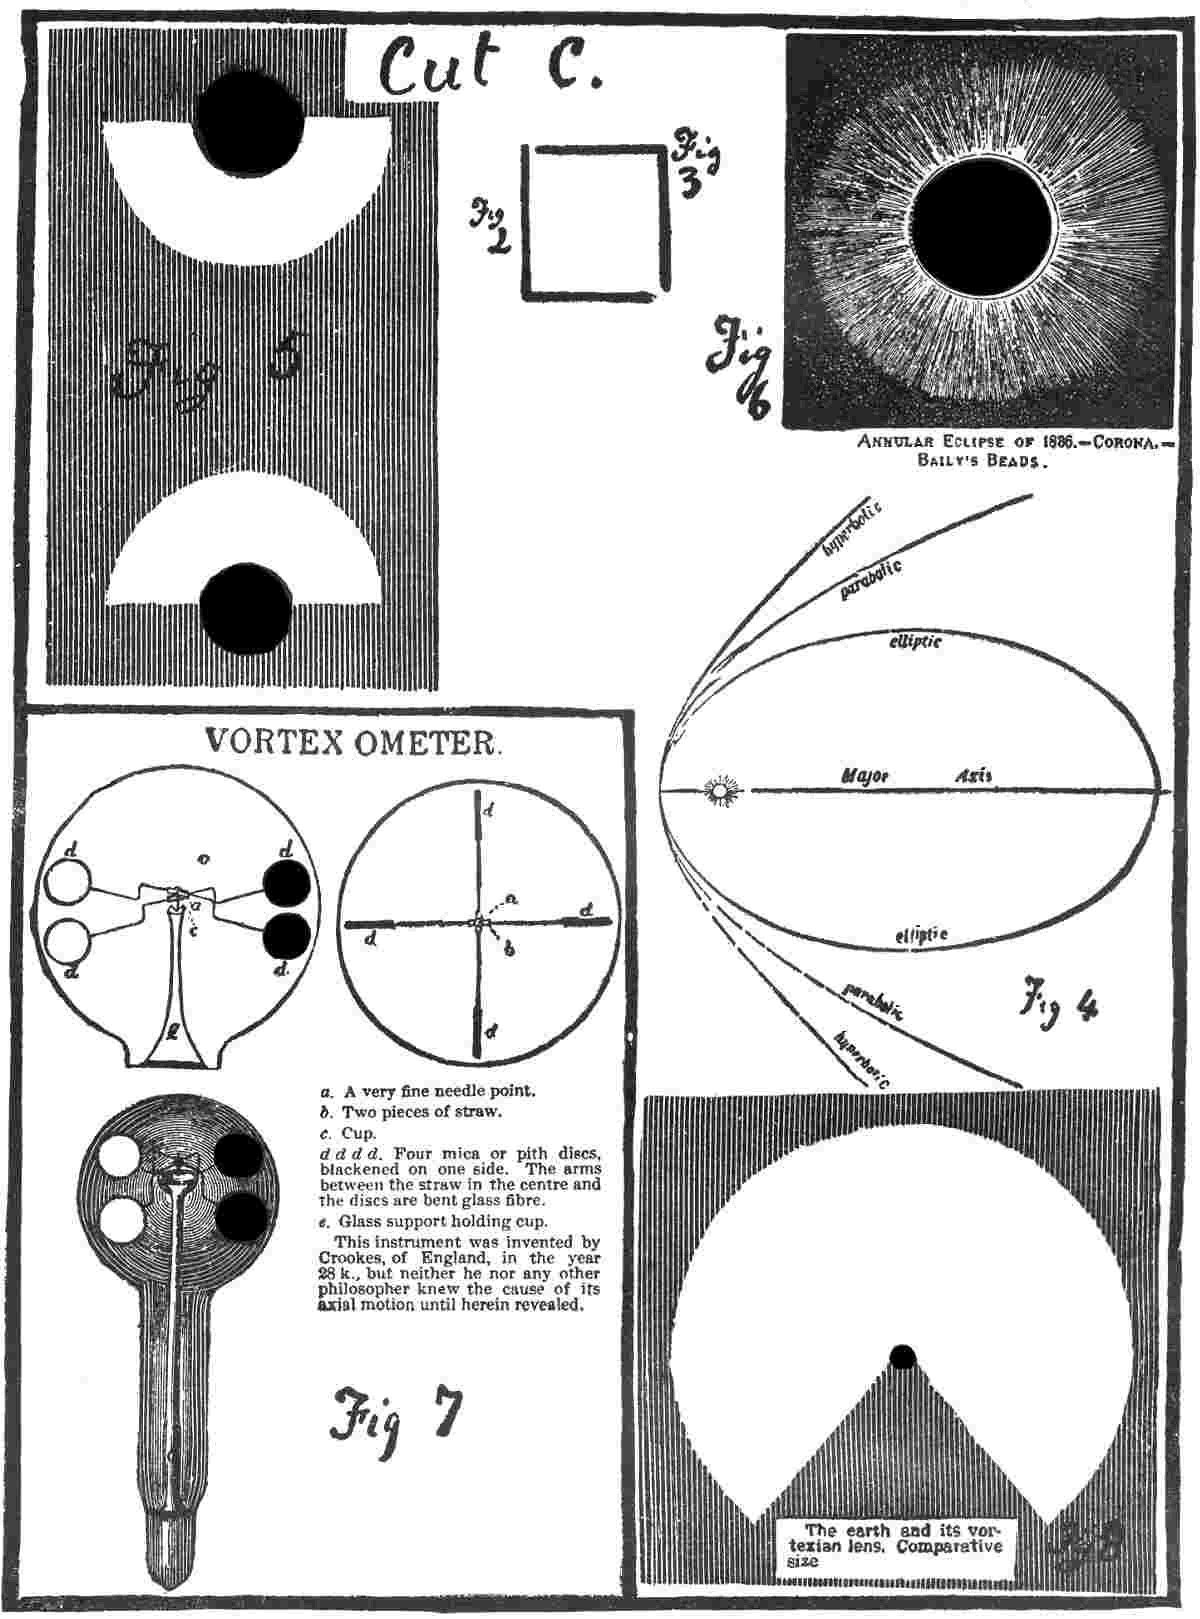 i069 Manifestations of Vortexya. [Figures 2 and 3 represent two L angled magnets neutralizing each other (38/1.46). Figure 4 shows currents of the master vortex (38/2.7). Figure 5 shows the lenses of two corporeal bodies, and the lines of vortexya between them (38/3.2<fn-position>). Figure 6 shows a solar eclipse with accompanying corona (38/1.34; 38/2.28; 38/3.10). Figure 7 shows a motor, which when set so that a light source falls upon it, vortexya will spin the vanes (38/4.15<fn-force>). Figure 8 shows the vortexian lens of the earth (38/3.2<fn-lens>). –ed.]